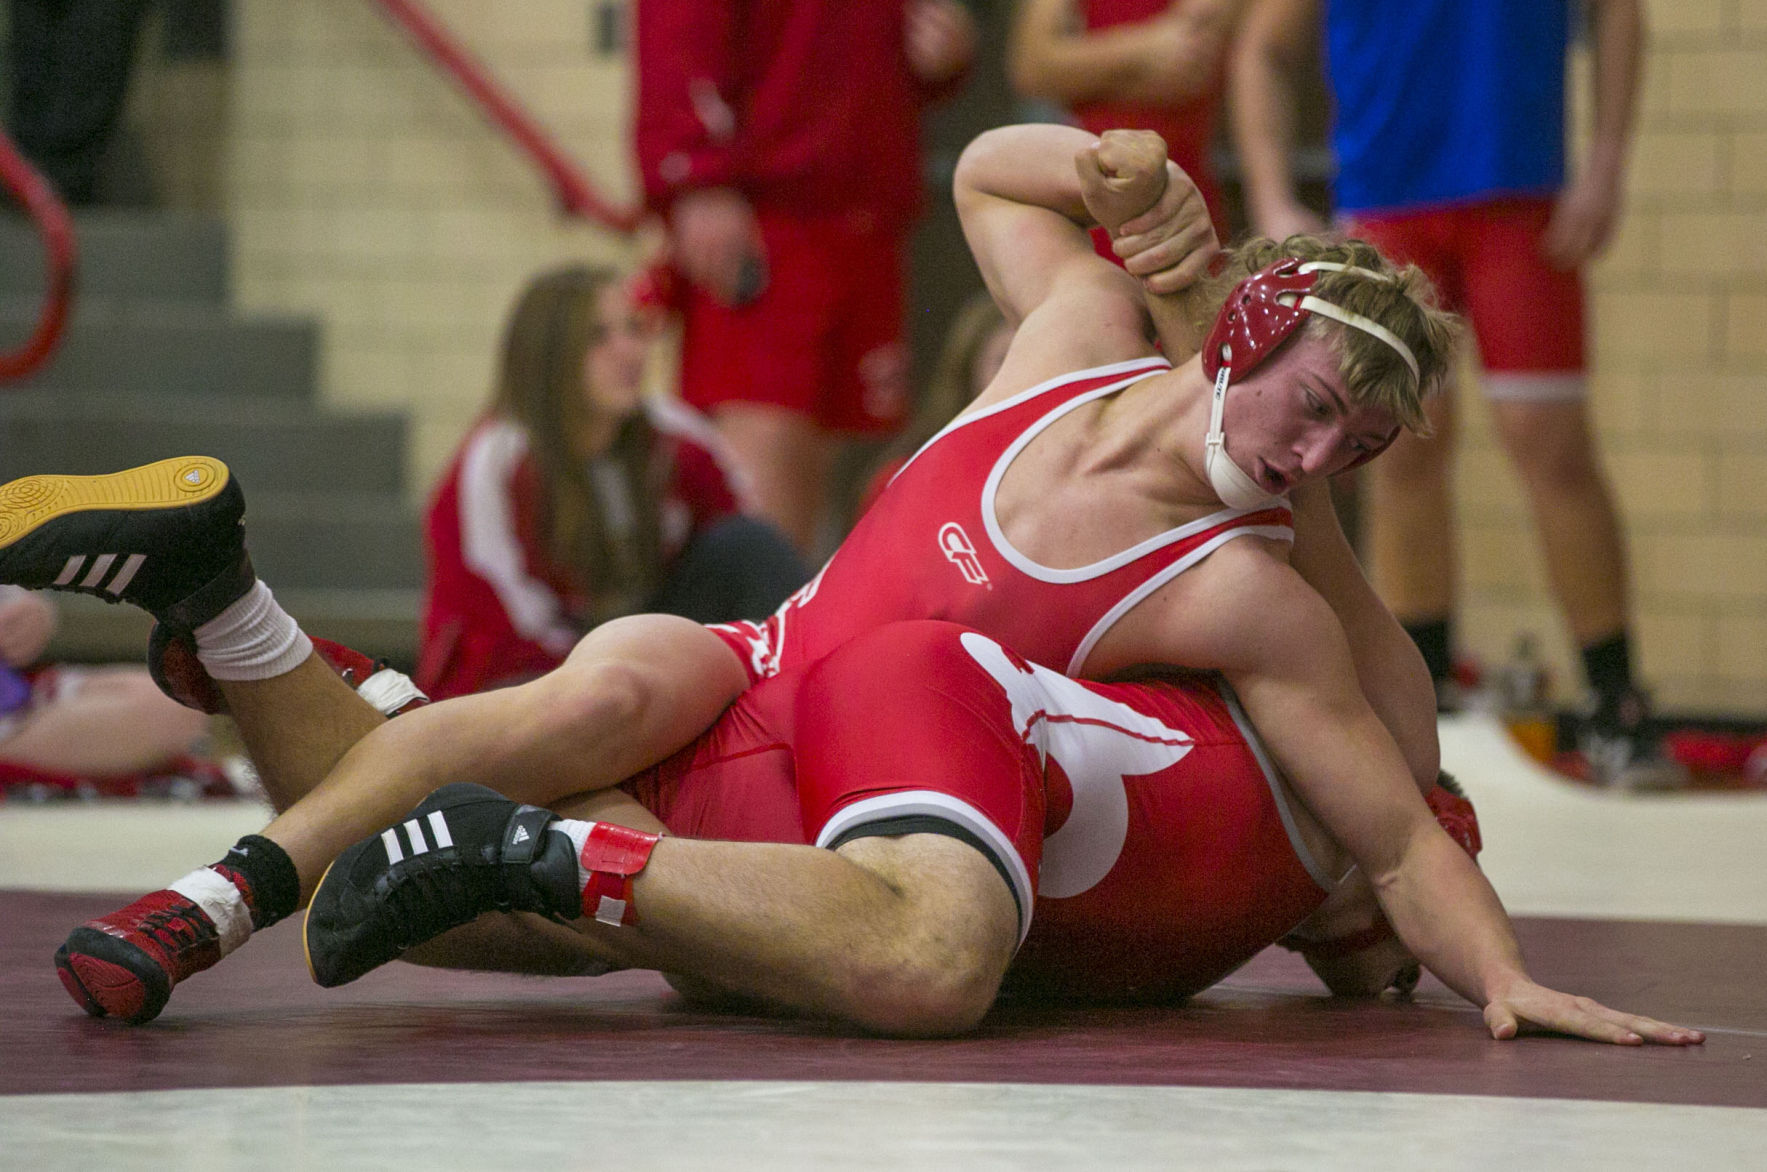 The Predicaments third Iowa high school wrestling rankings picture